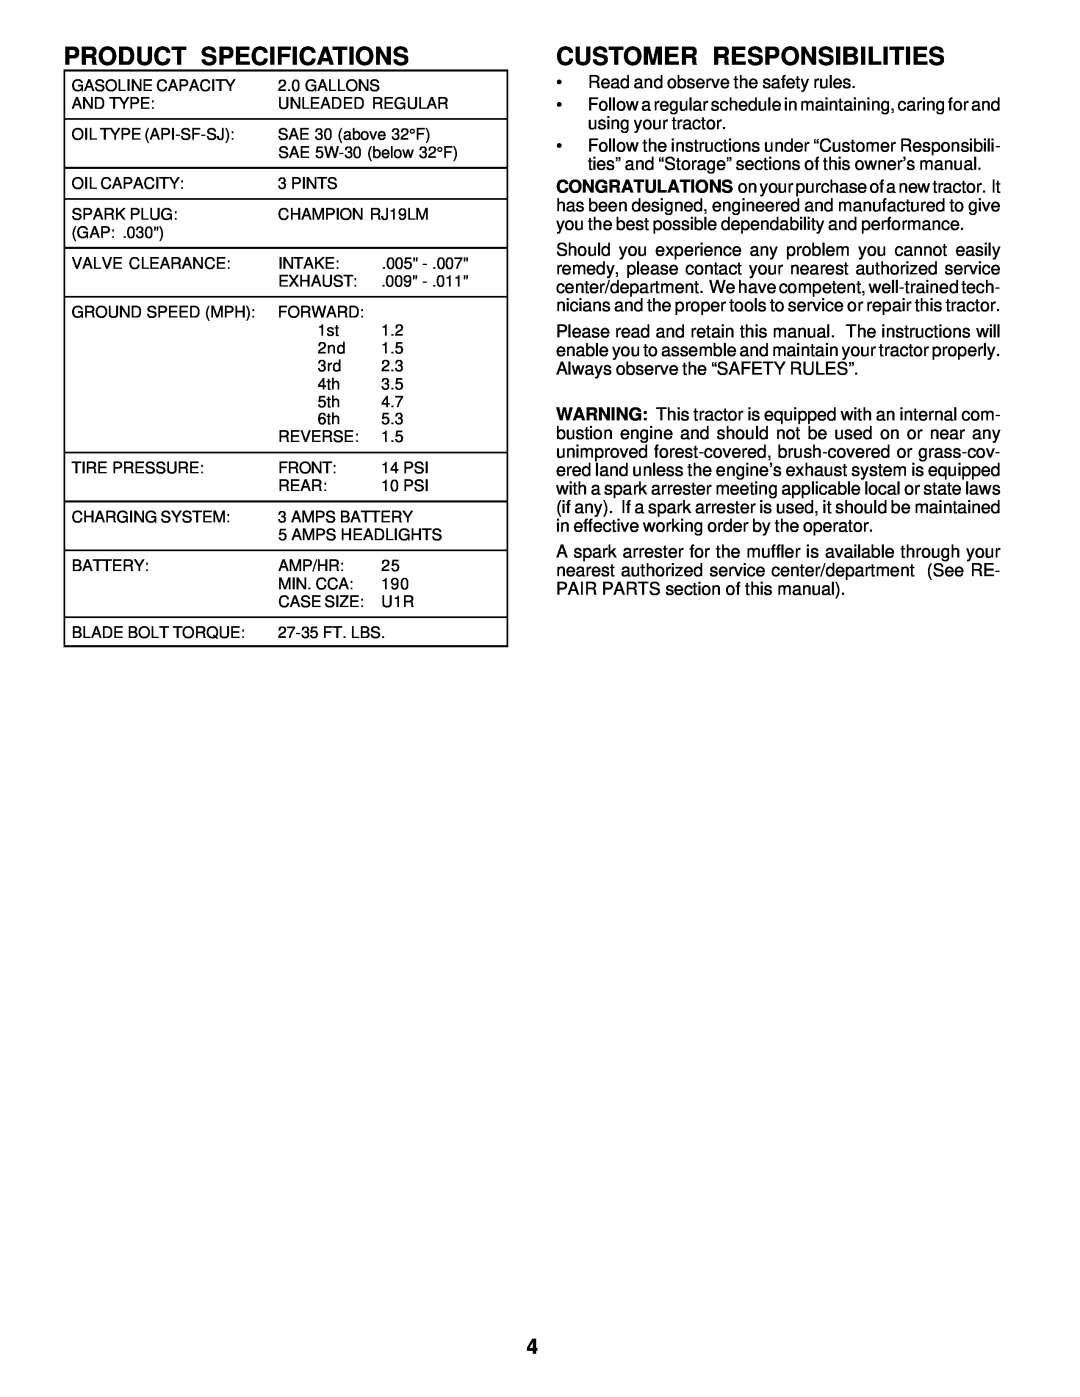 Weed Eater WE16542D owner manual Product Specifications, Customer Responsibilities 